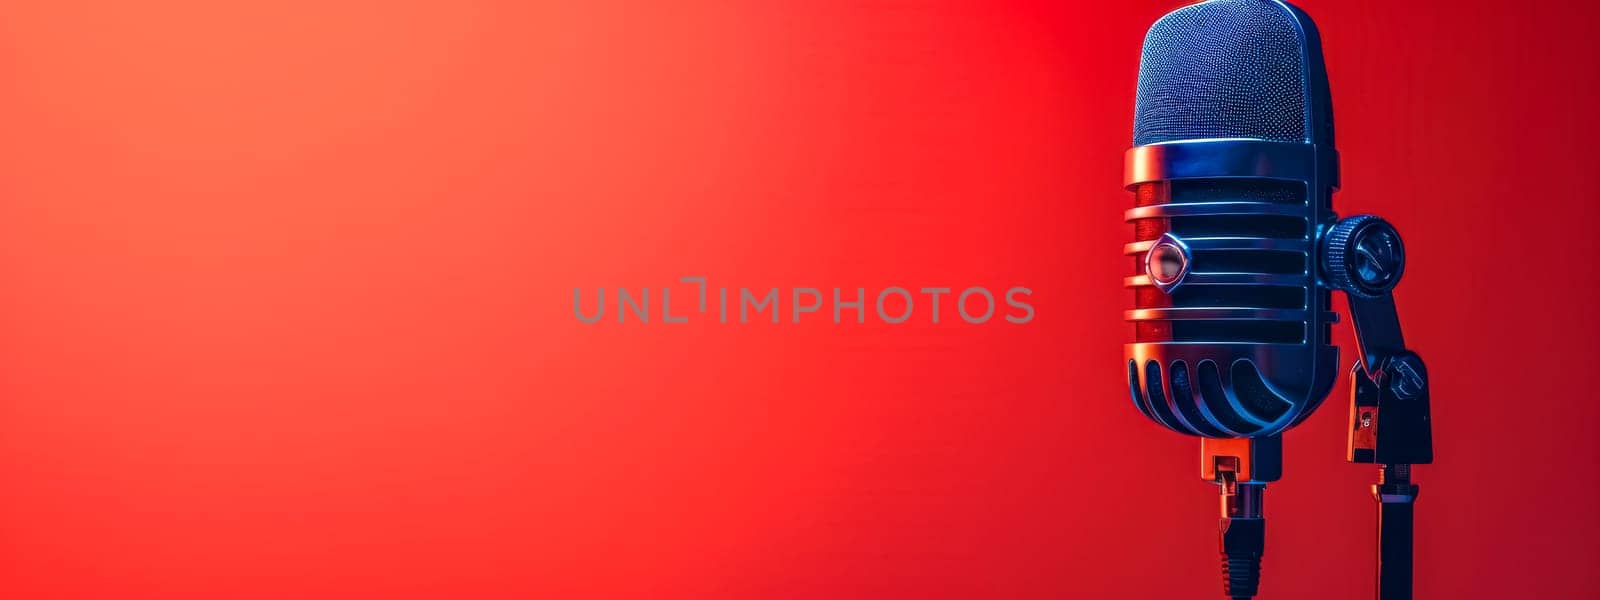 Vintage microphone on red background, copy space by Edophoto